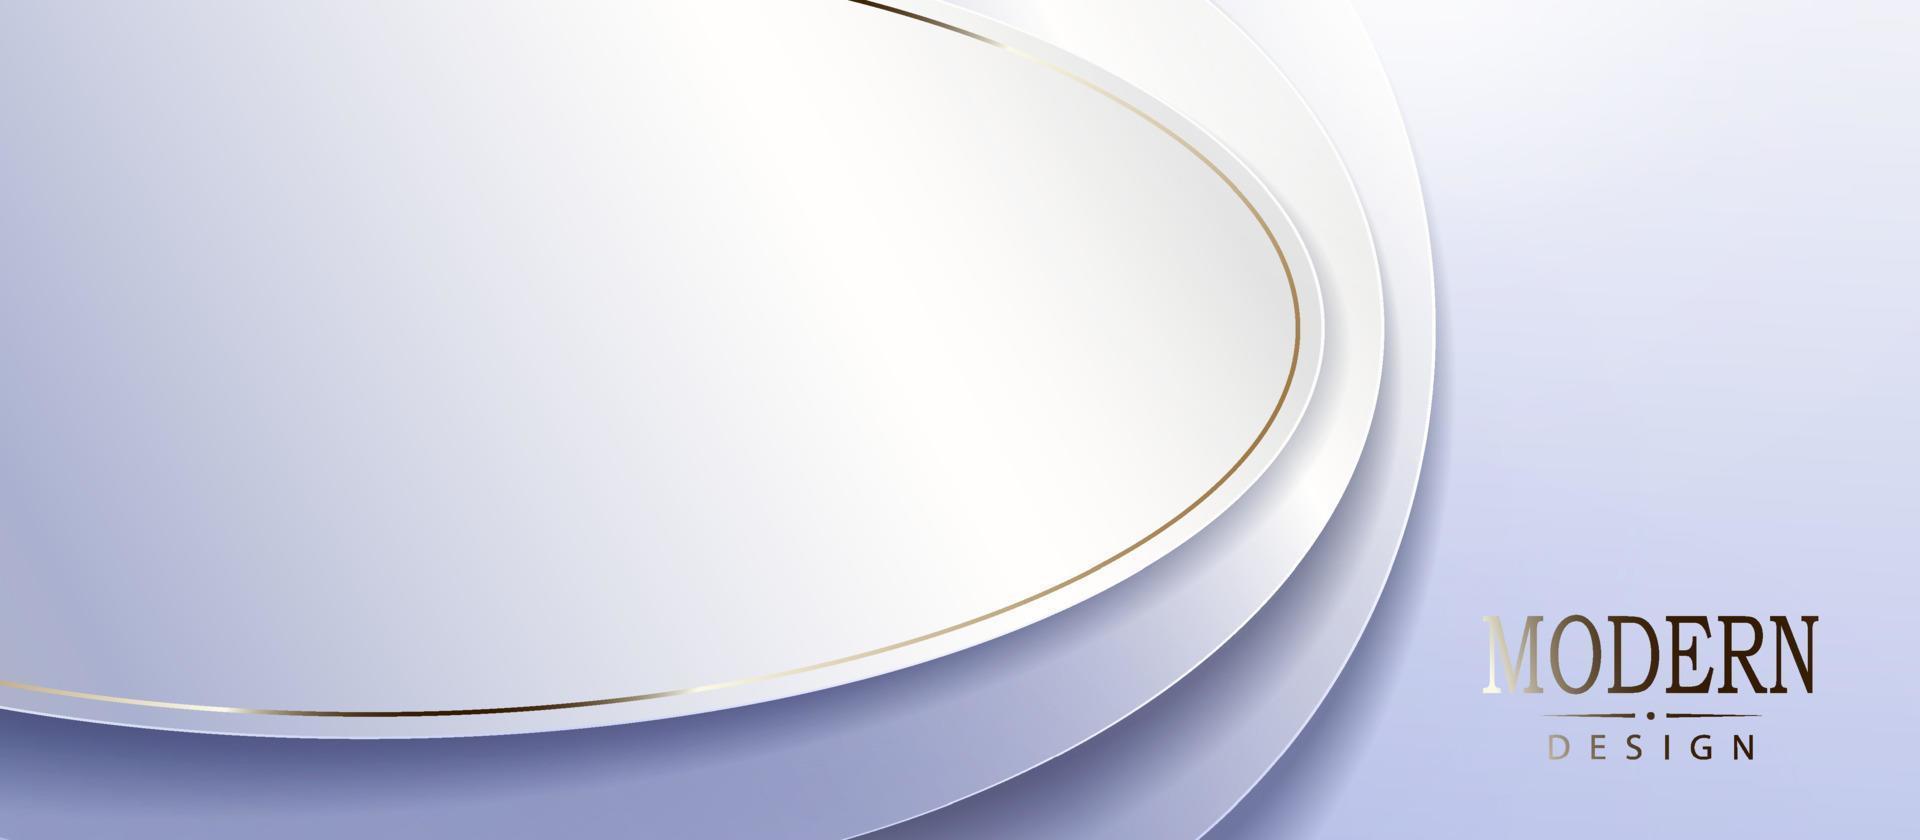 Light background, oval frames with a shiny golden border. vector